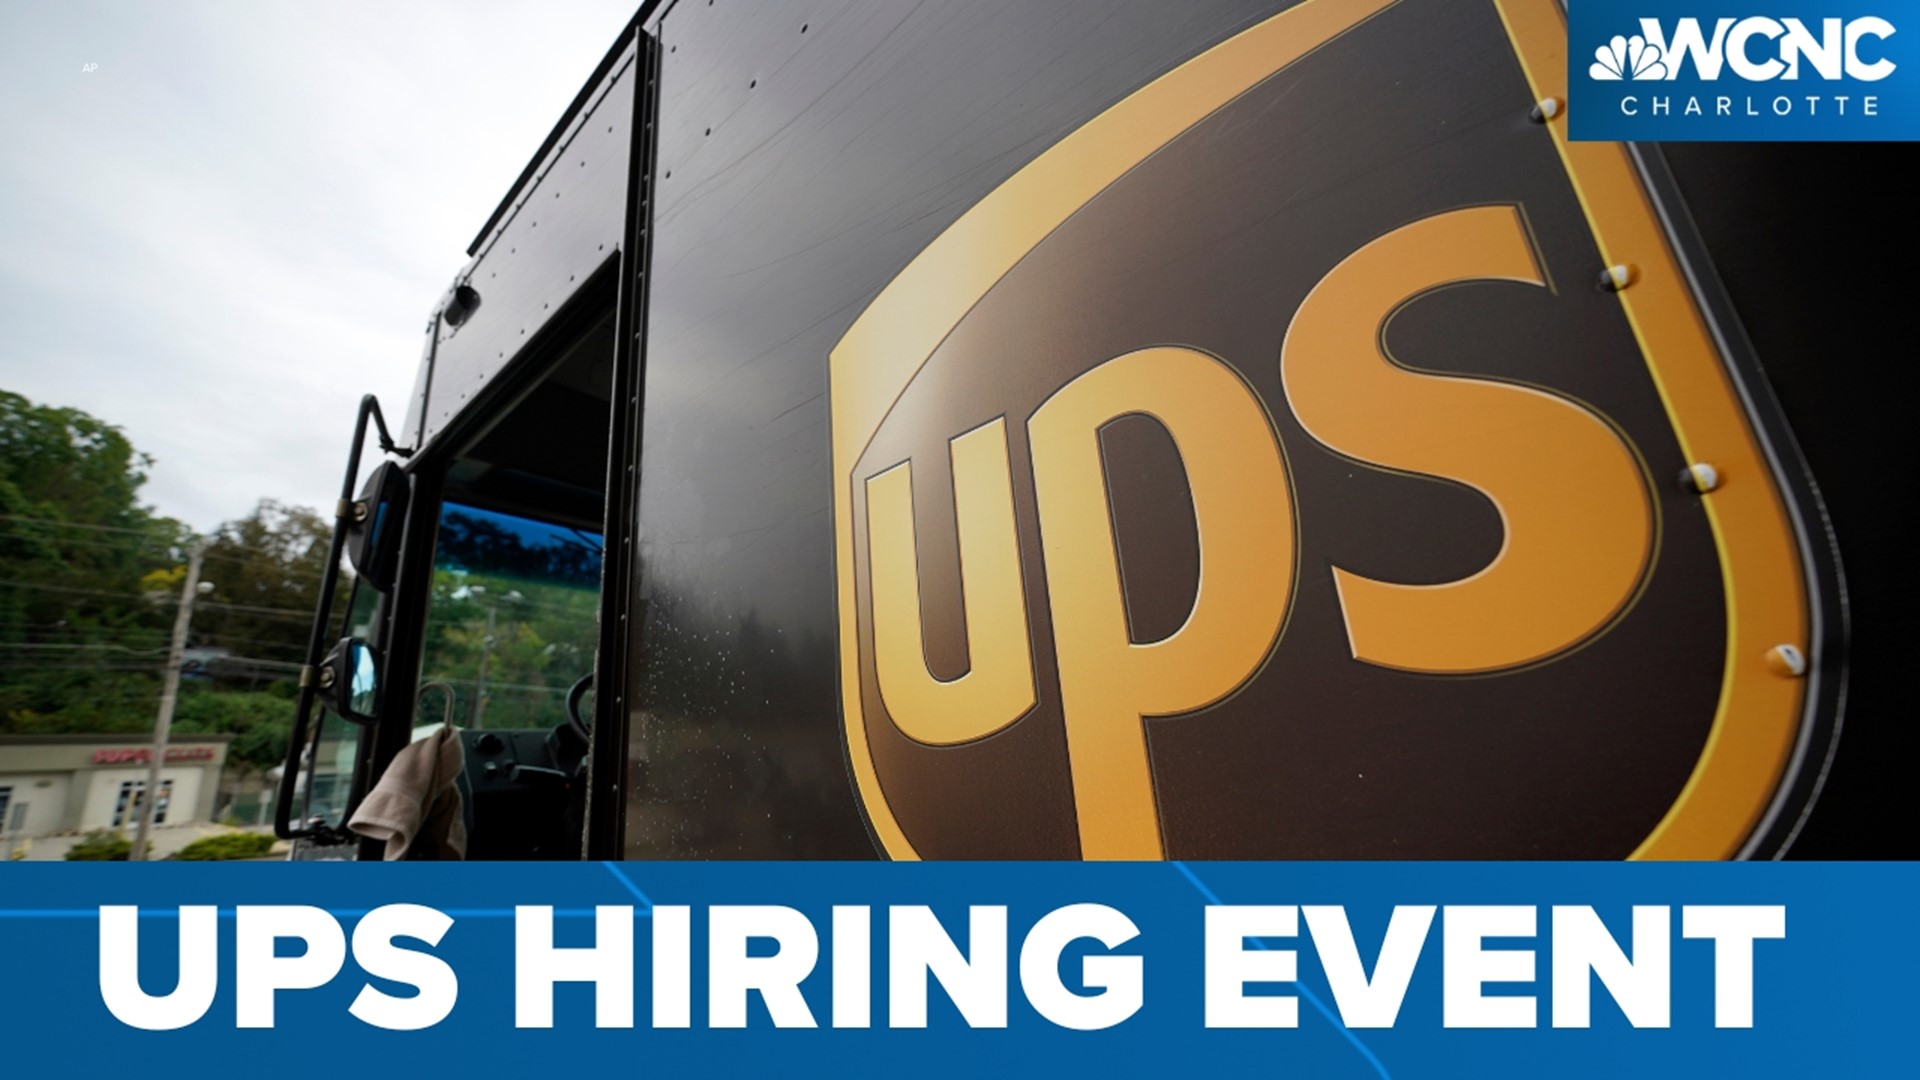 UPS is working to hire nearly 100,000 employees in our area for the holiday season.